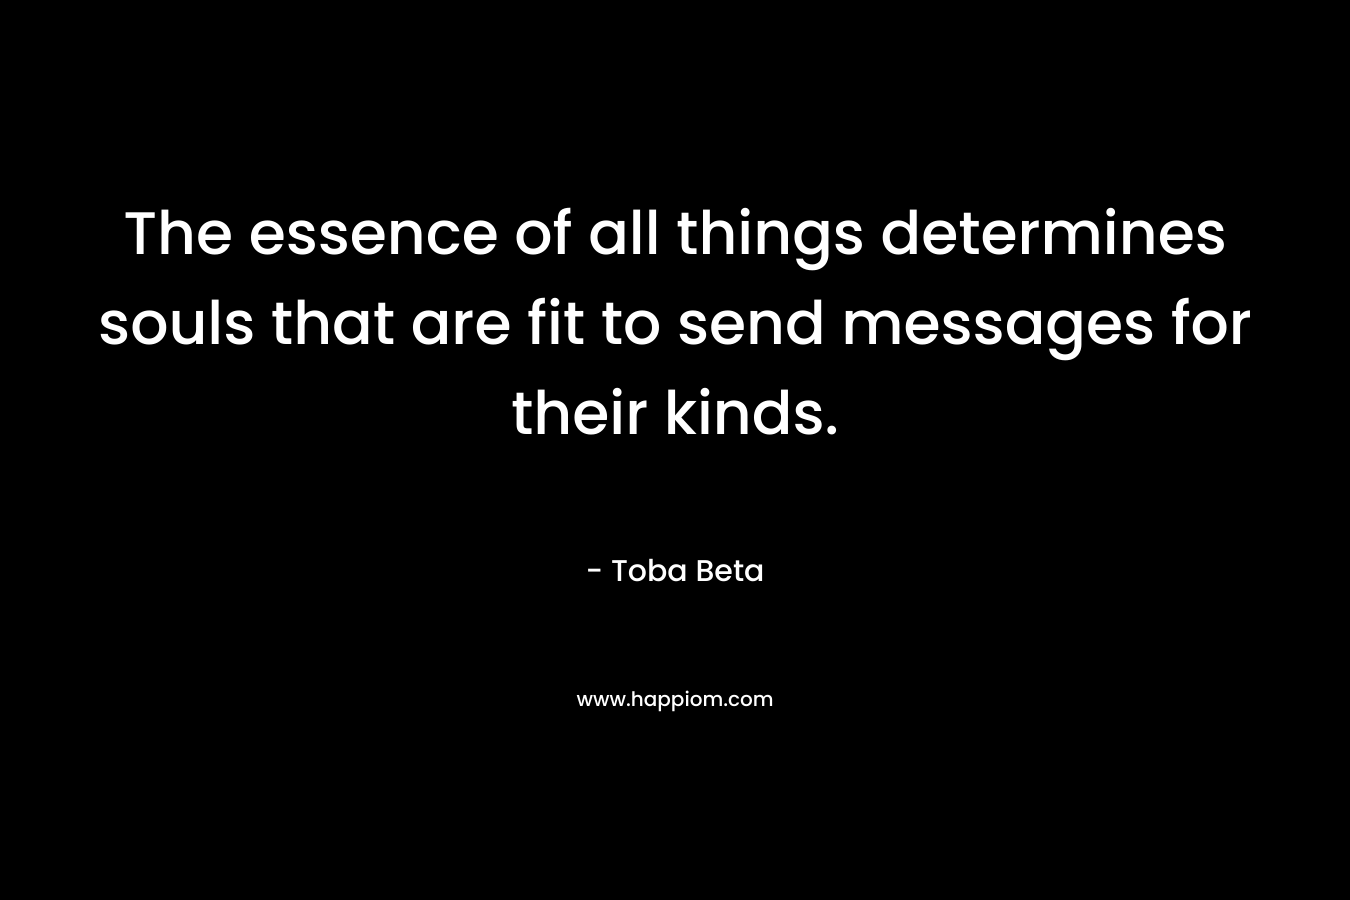 The essence of all things determines souls that are fit to send messages for their kinds.